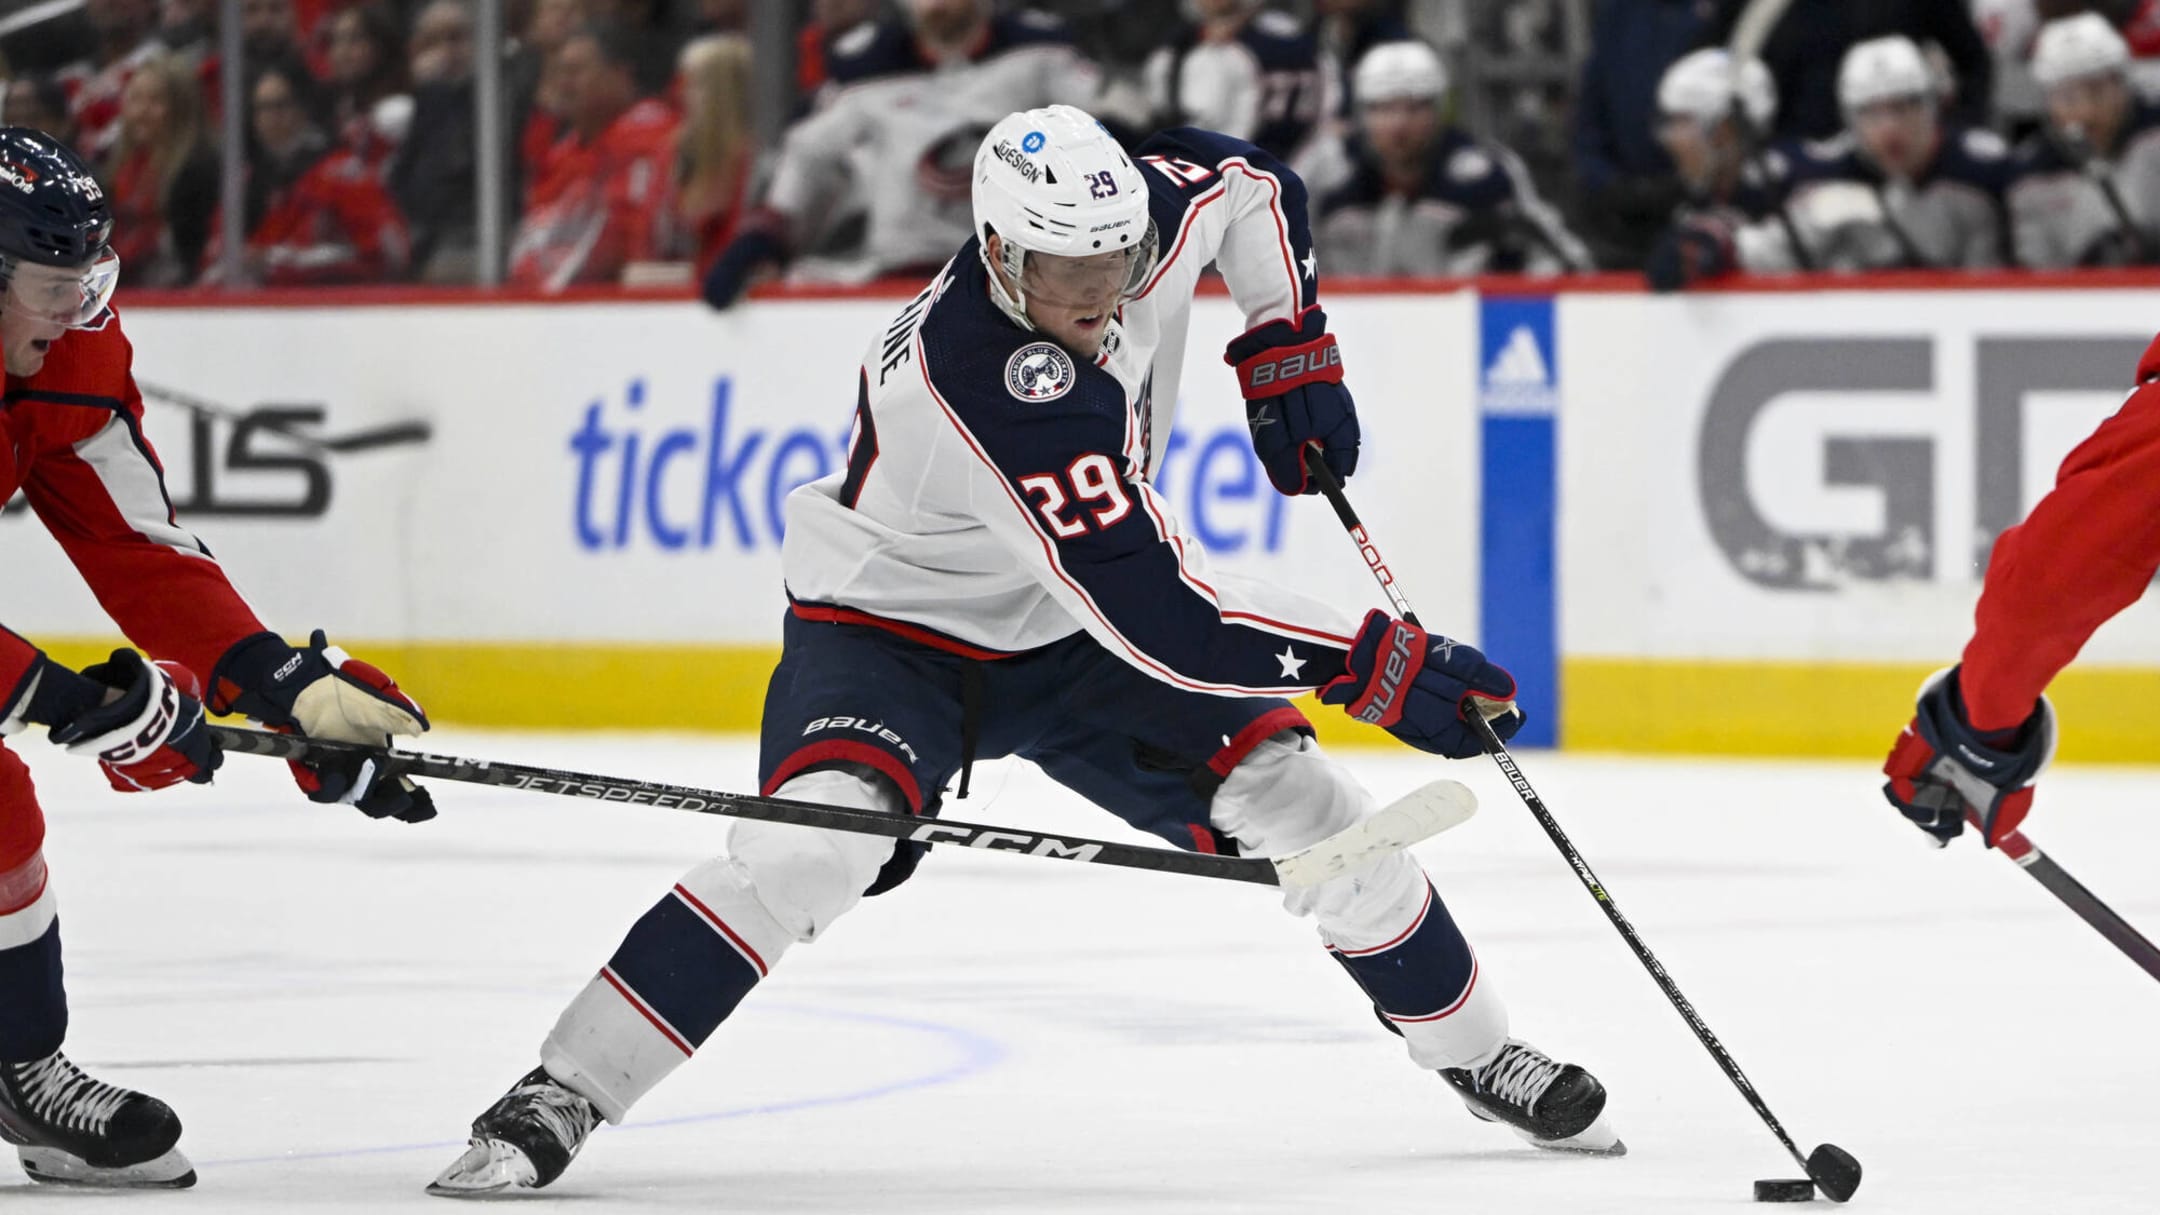 3 Takeaways From Capitals' 7-6 Loss To Blue Jackets